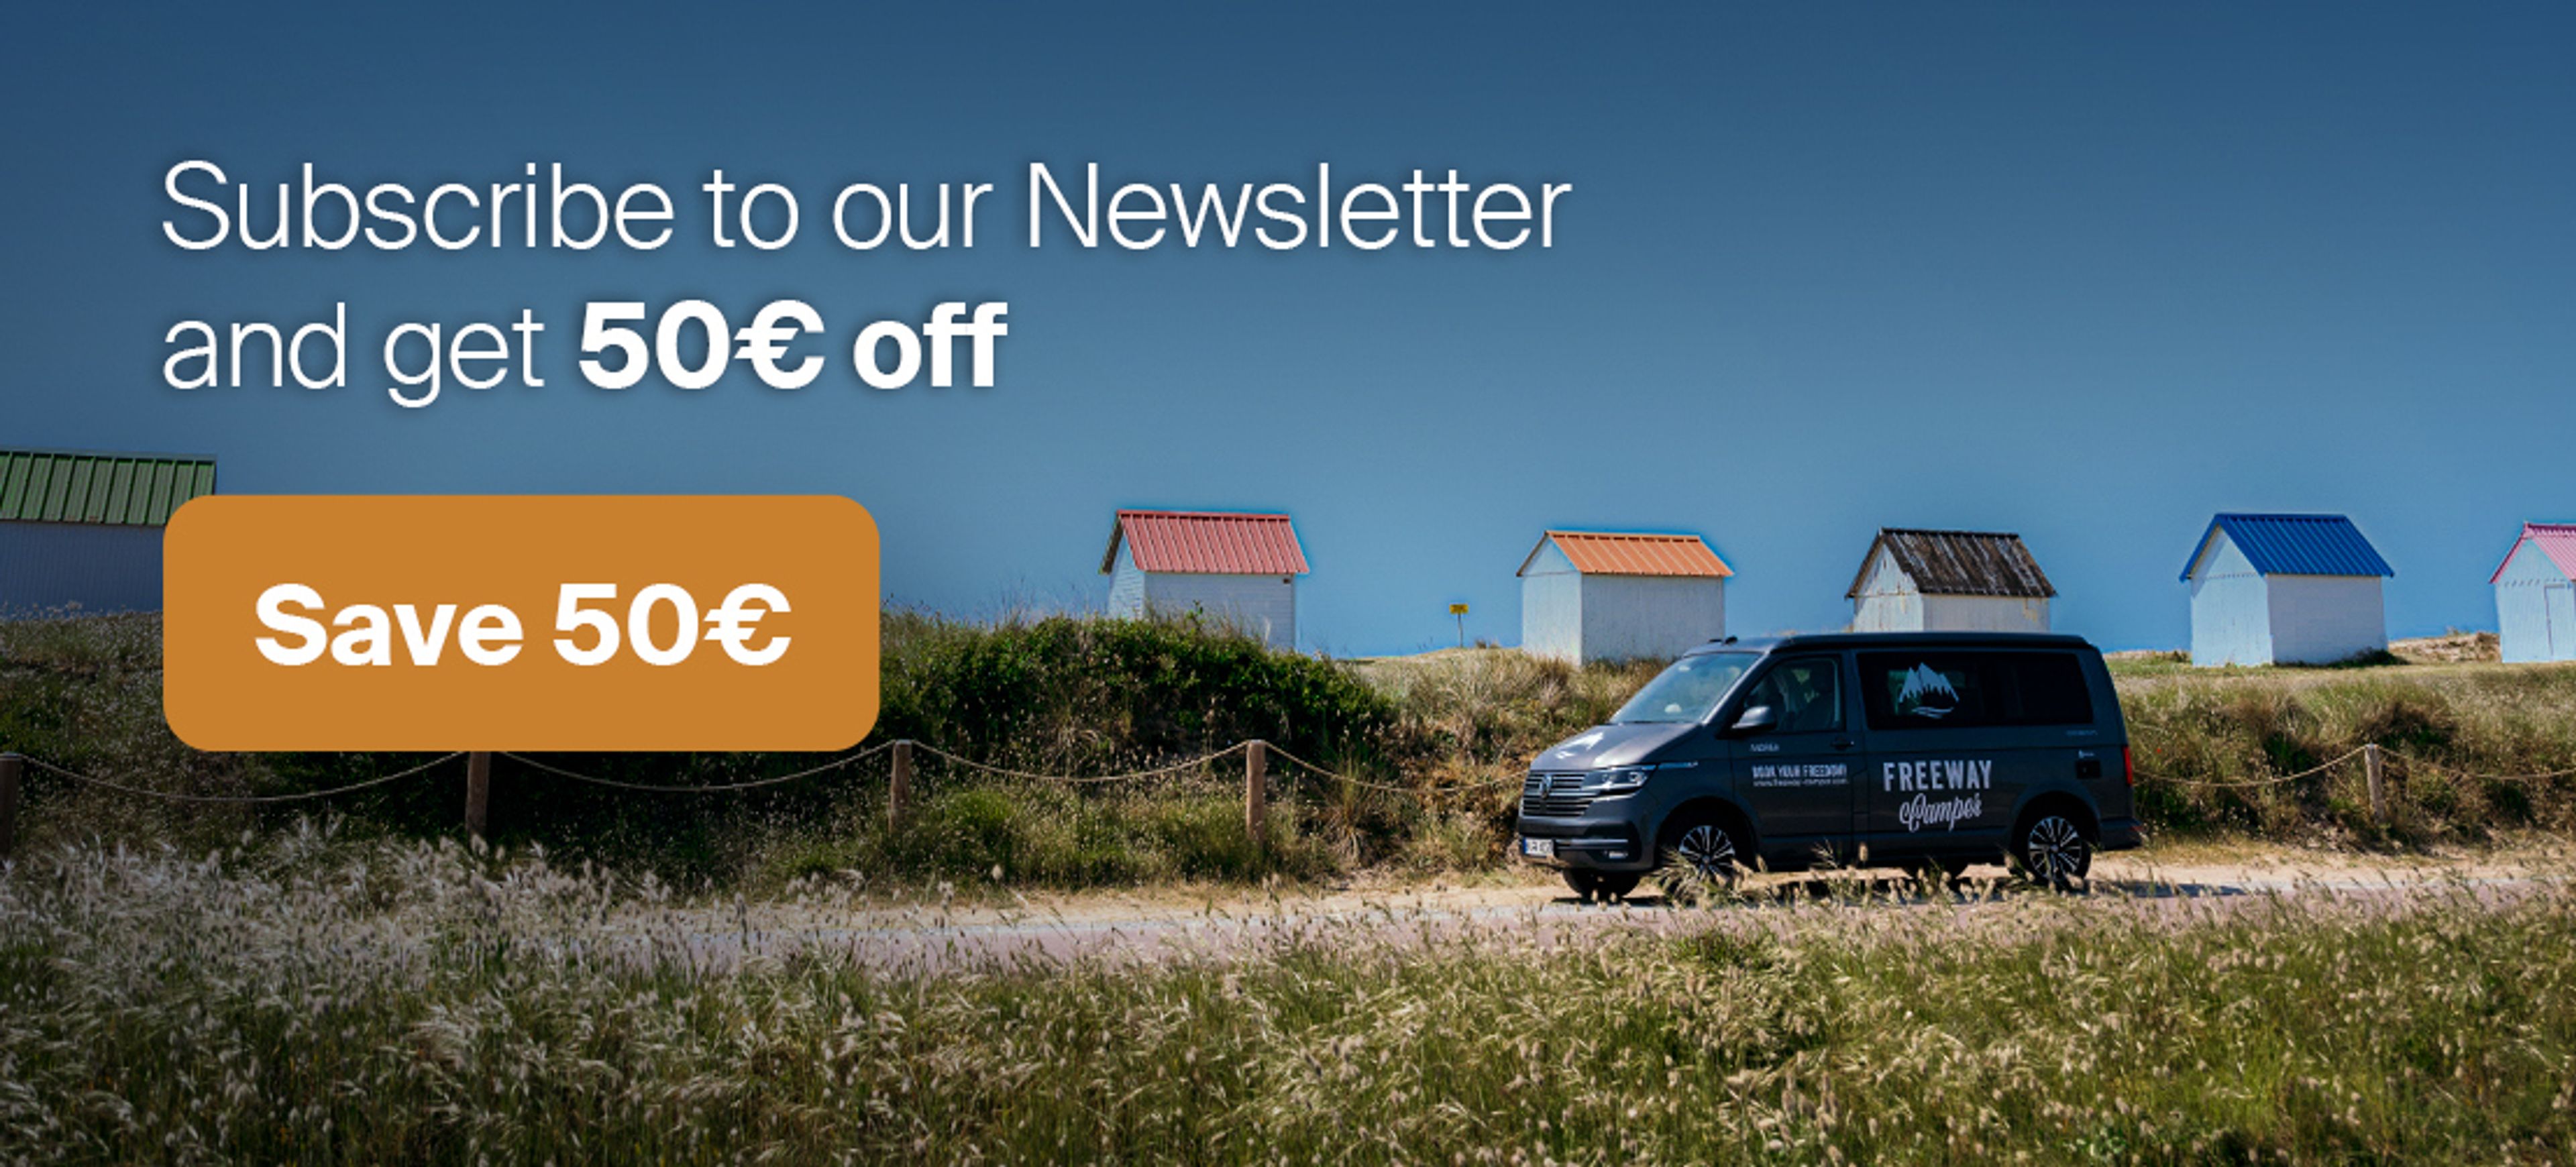 Subscribe to our newsletter and save 50€